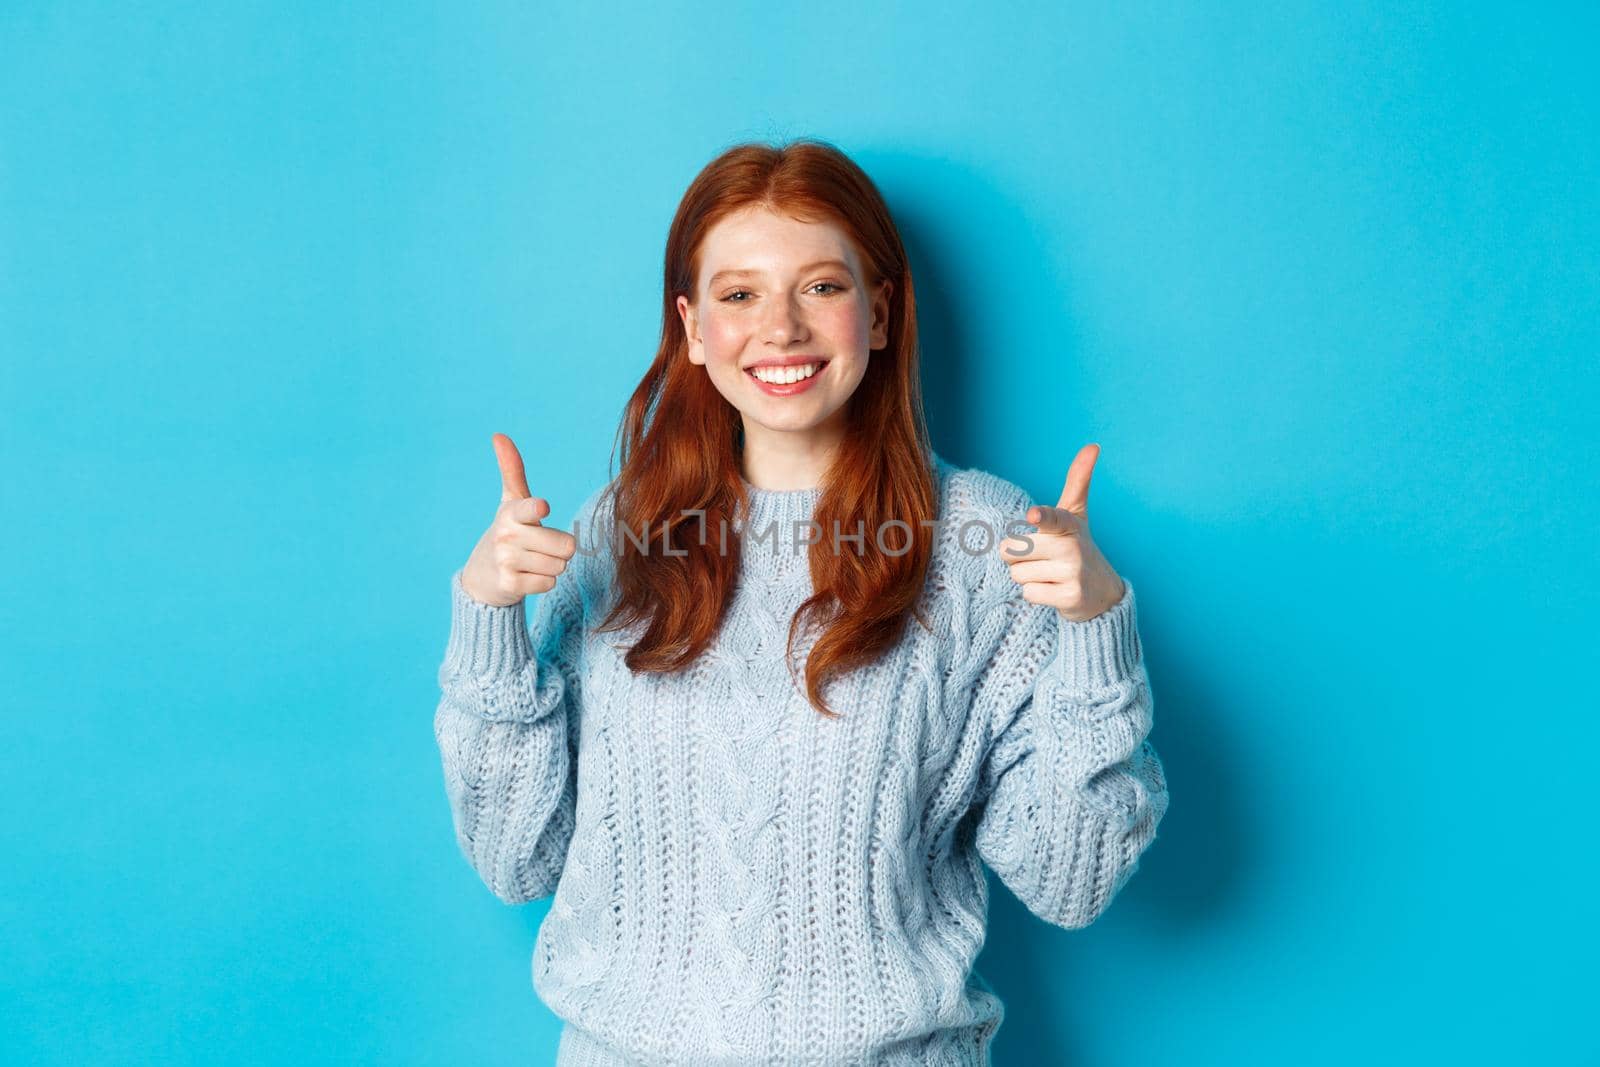 Cheerful teen girl with red hair, pointing fingers at camera and smiling, congratulating or praising you, standing over blue background.